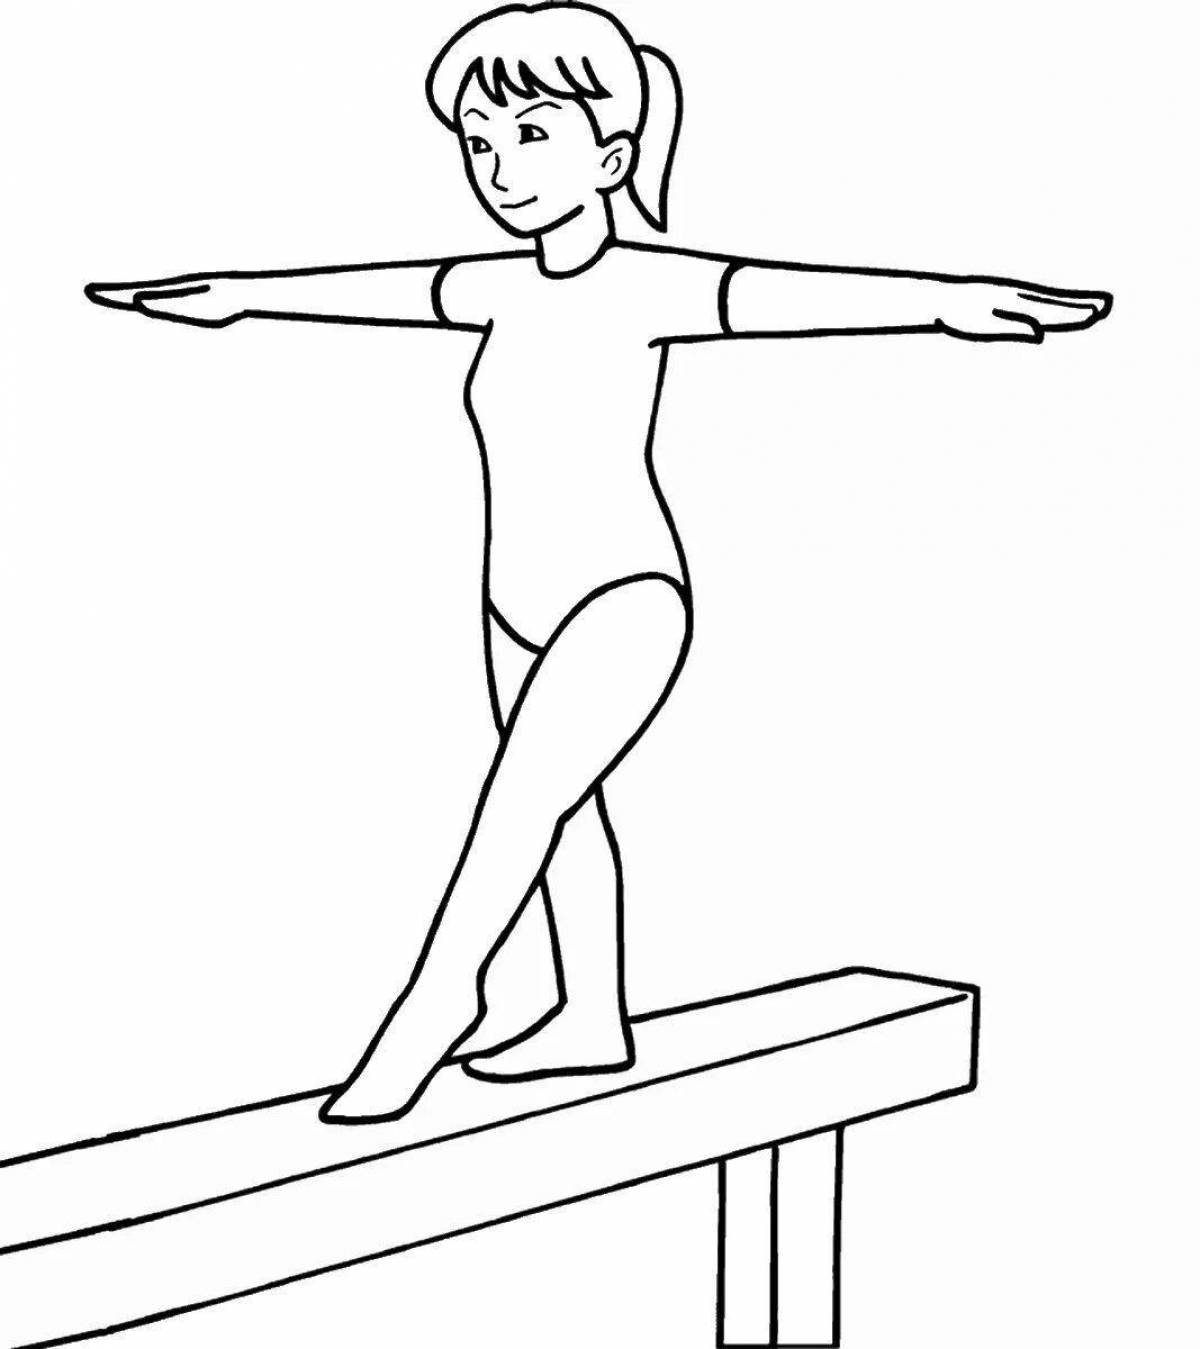 Colorful gymnastic coloring book for kids